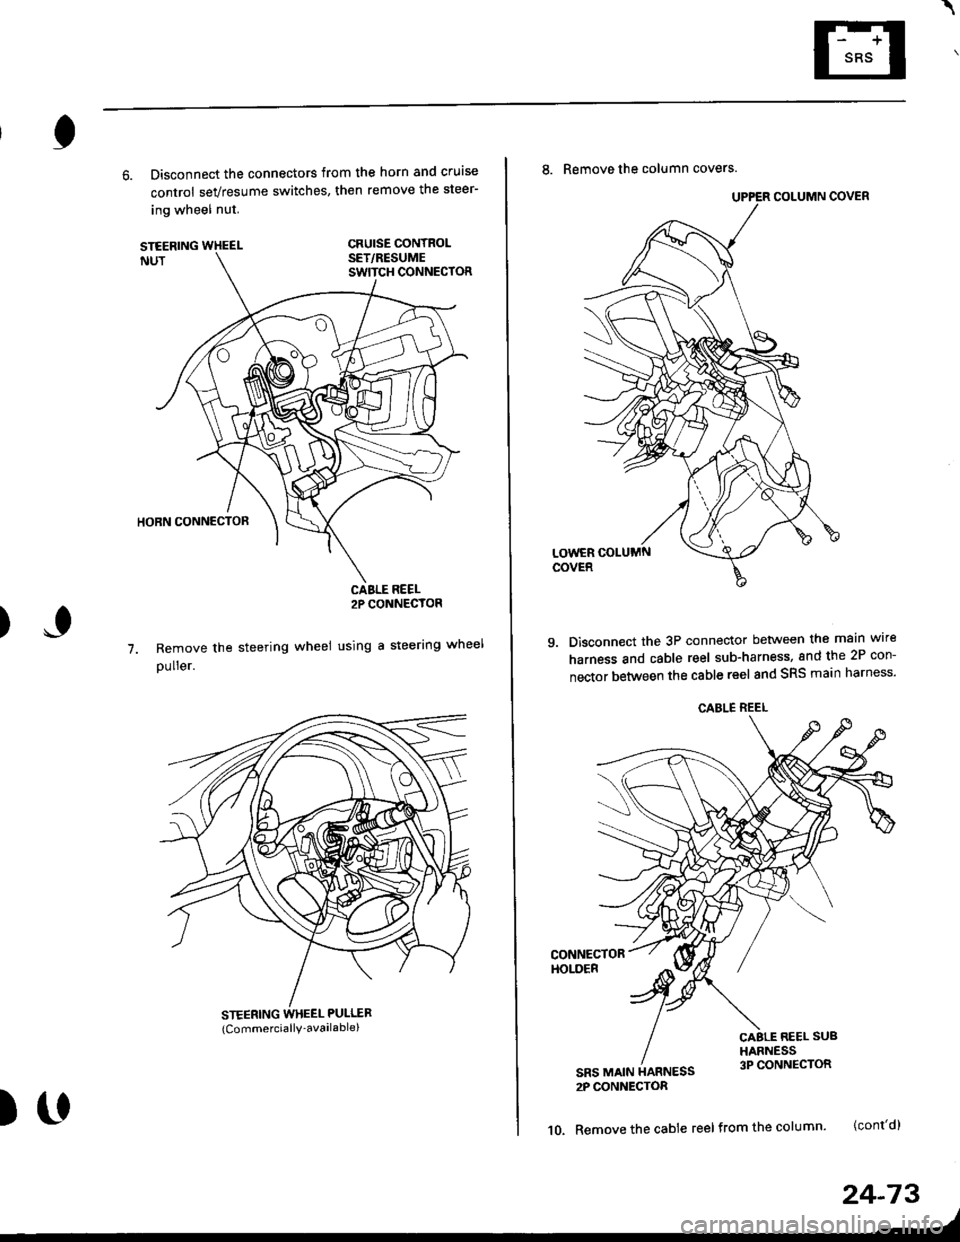 HONDA CIVIC 1996 6.G Repair Manual \
6. Disconnect the connectors from the horn and cruise
control sevresume switches, then remove the steer-
ing wheel nut.
STEERINGNUT
CRUISE CONTROLSET/RESUMESWITCH CONNECTOR
)
HORN CONNECTOR
Remove t